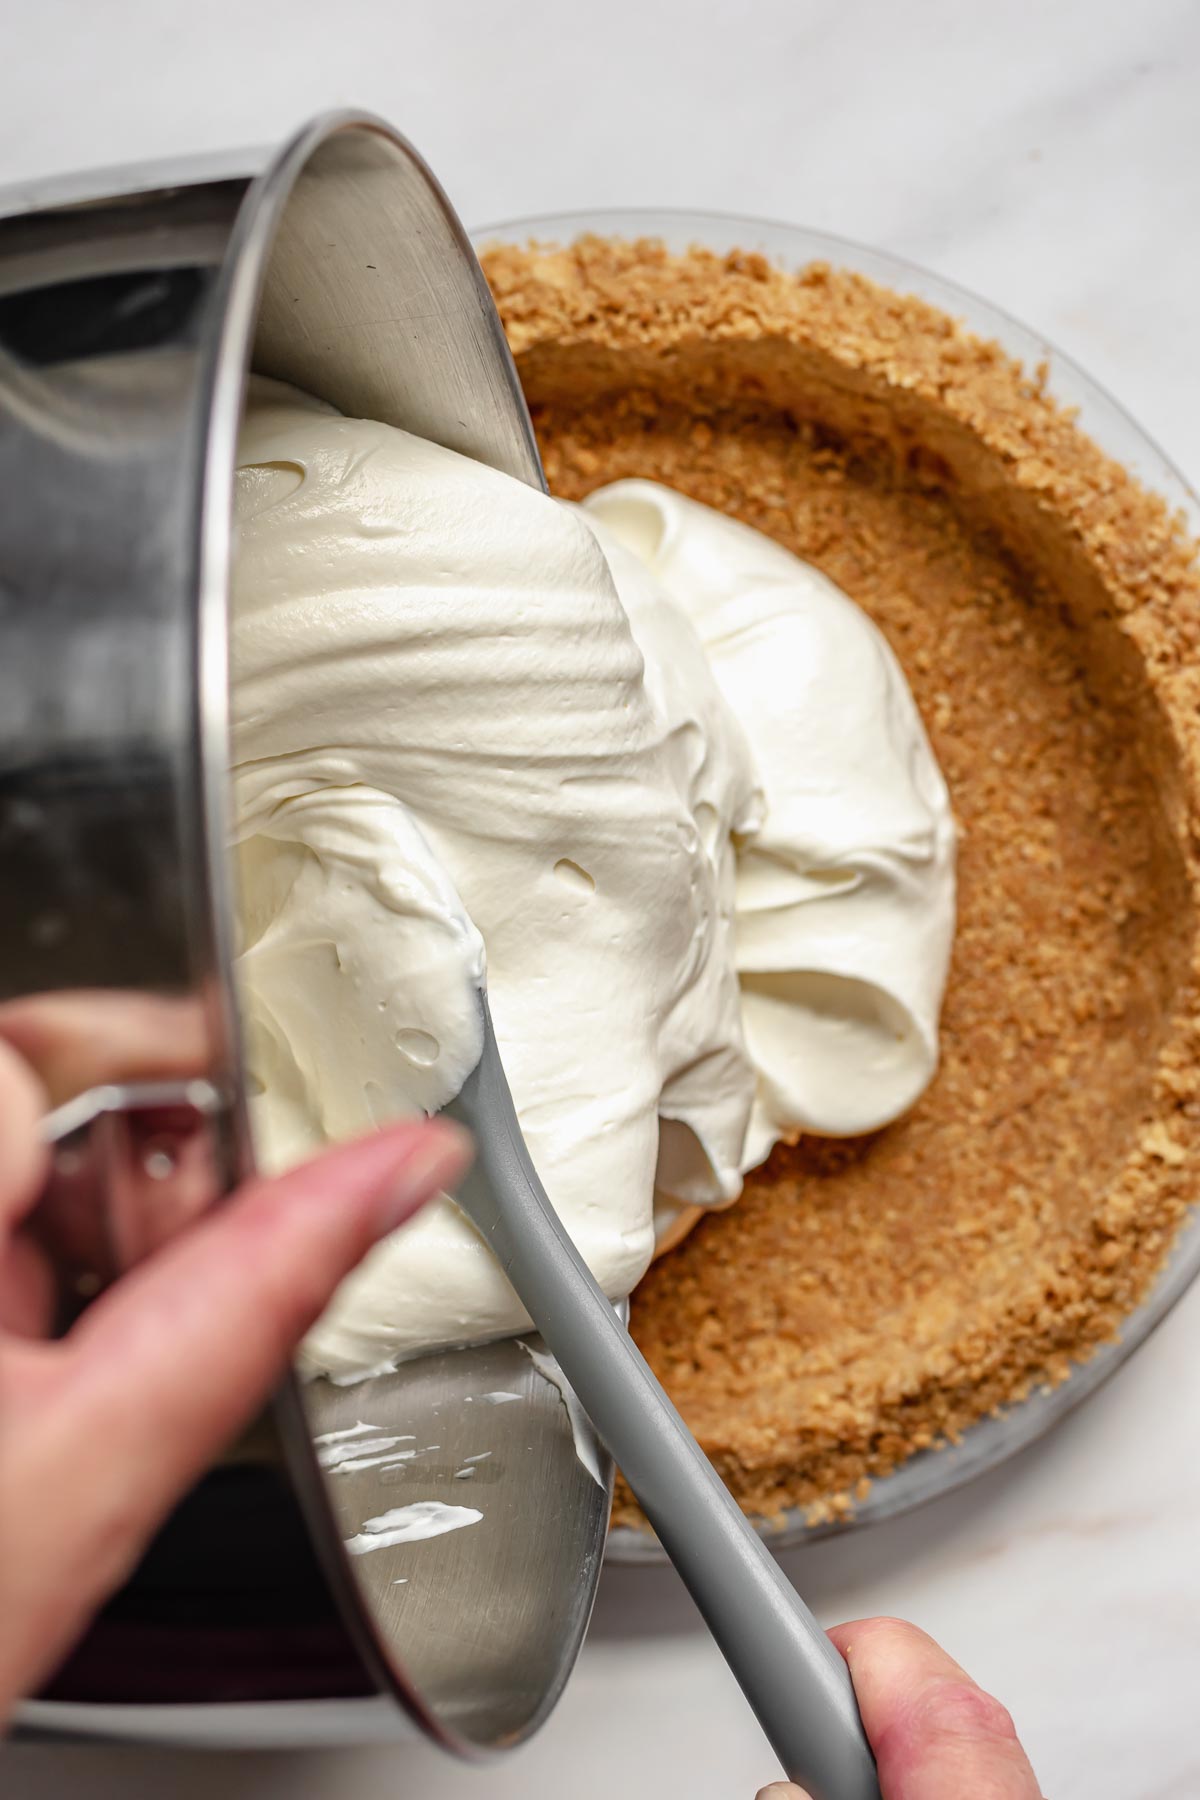 Cheesecake mixture being poured into a graham cracker crust.